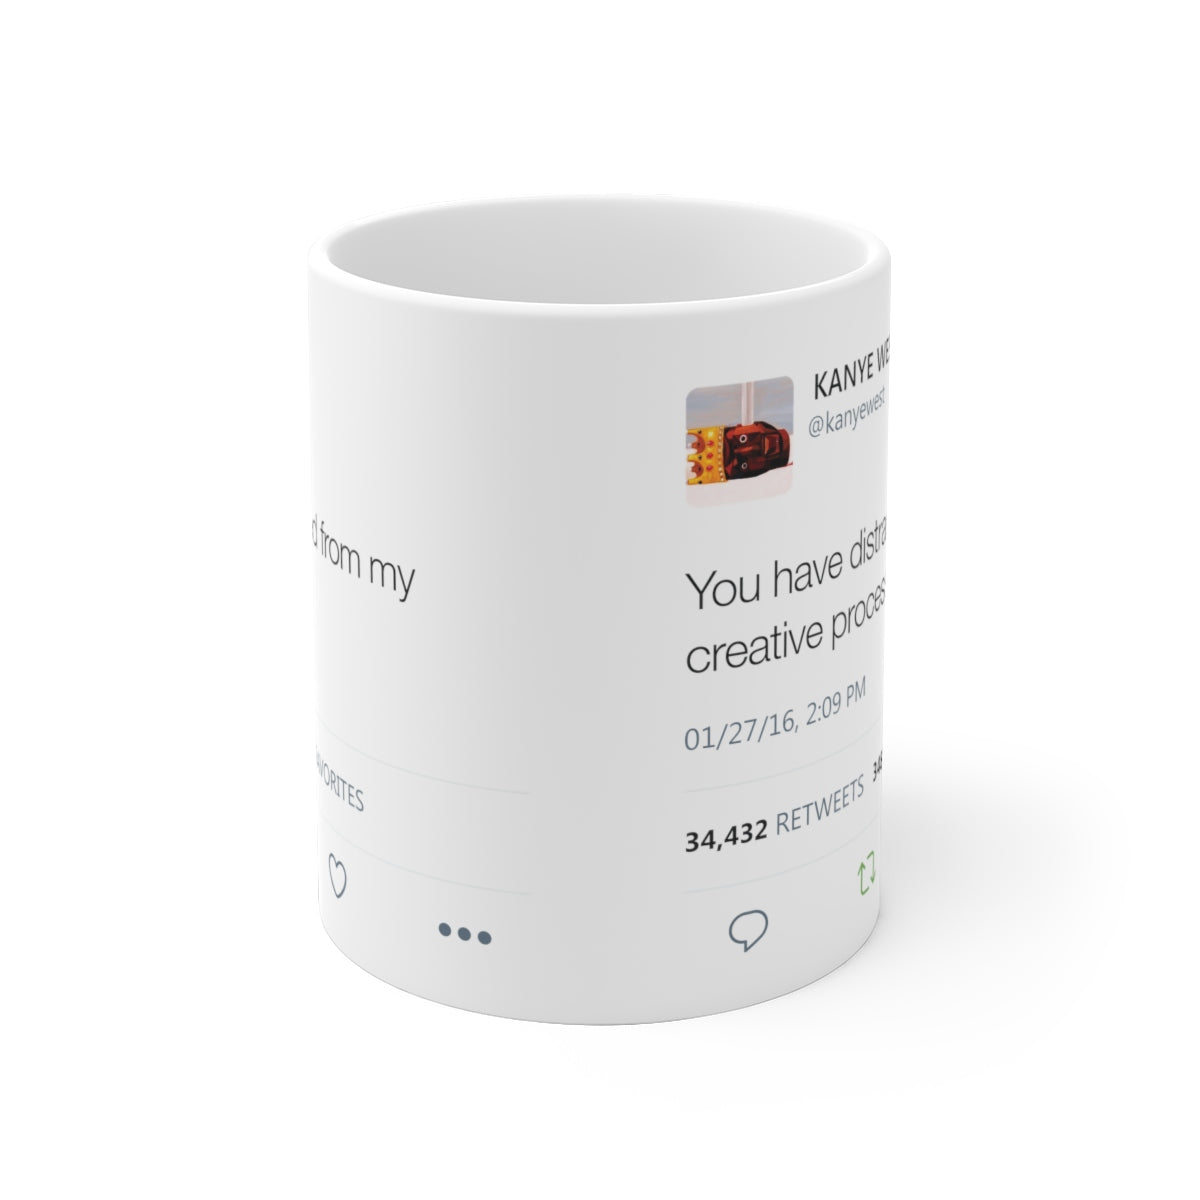 You have distracted from my creative process Kanye West Tweet Mug-Archethype